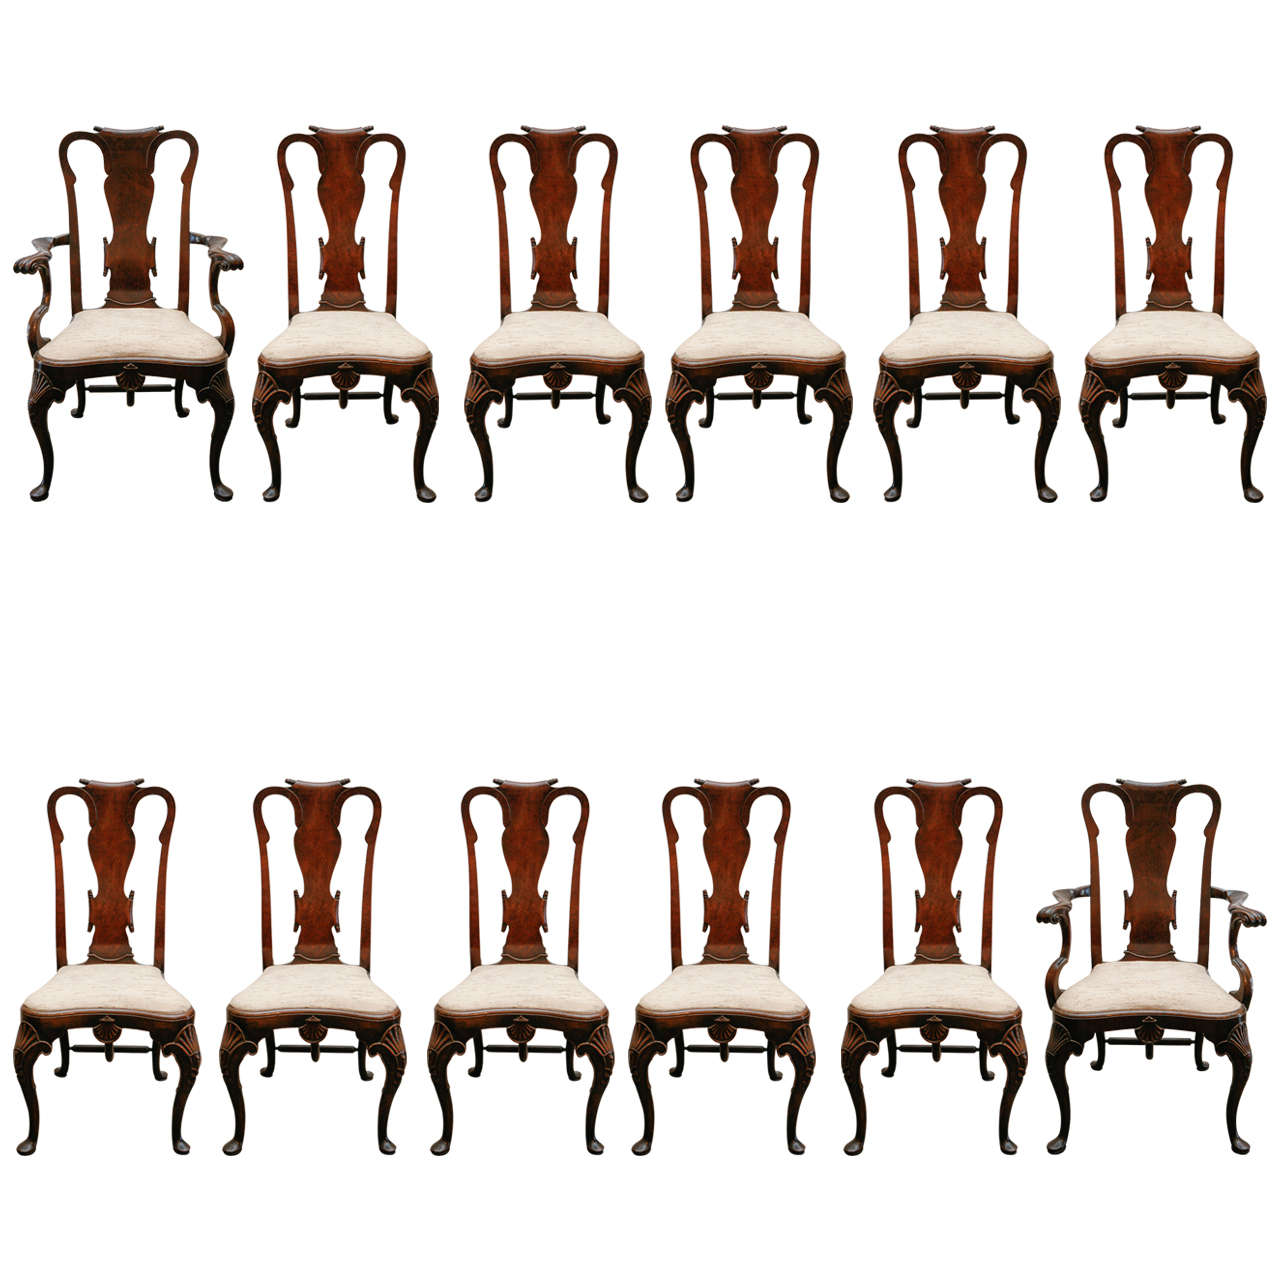 Unique Set of Turn of the Century, English Dining Chairs